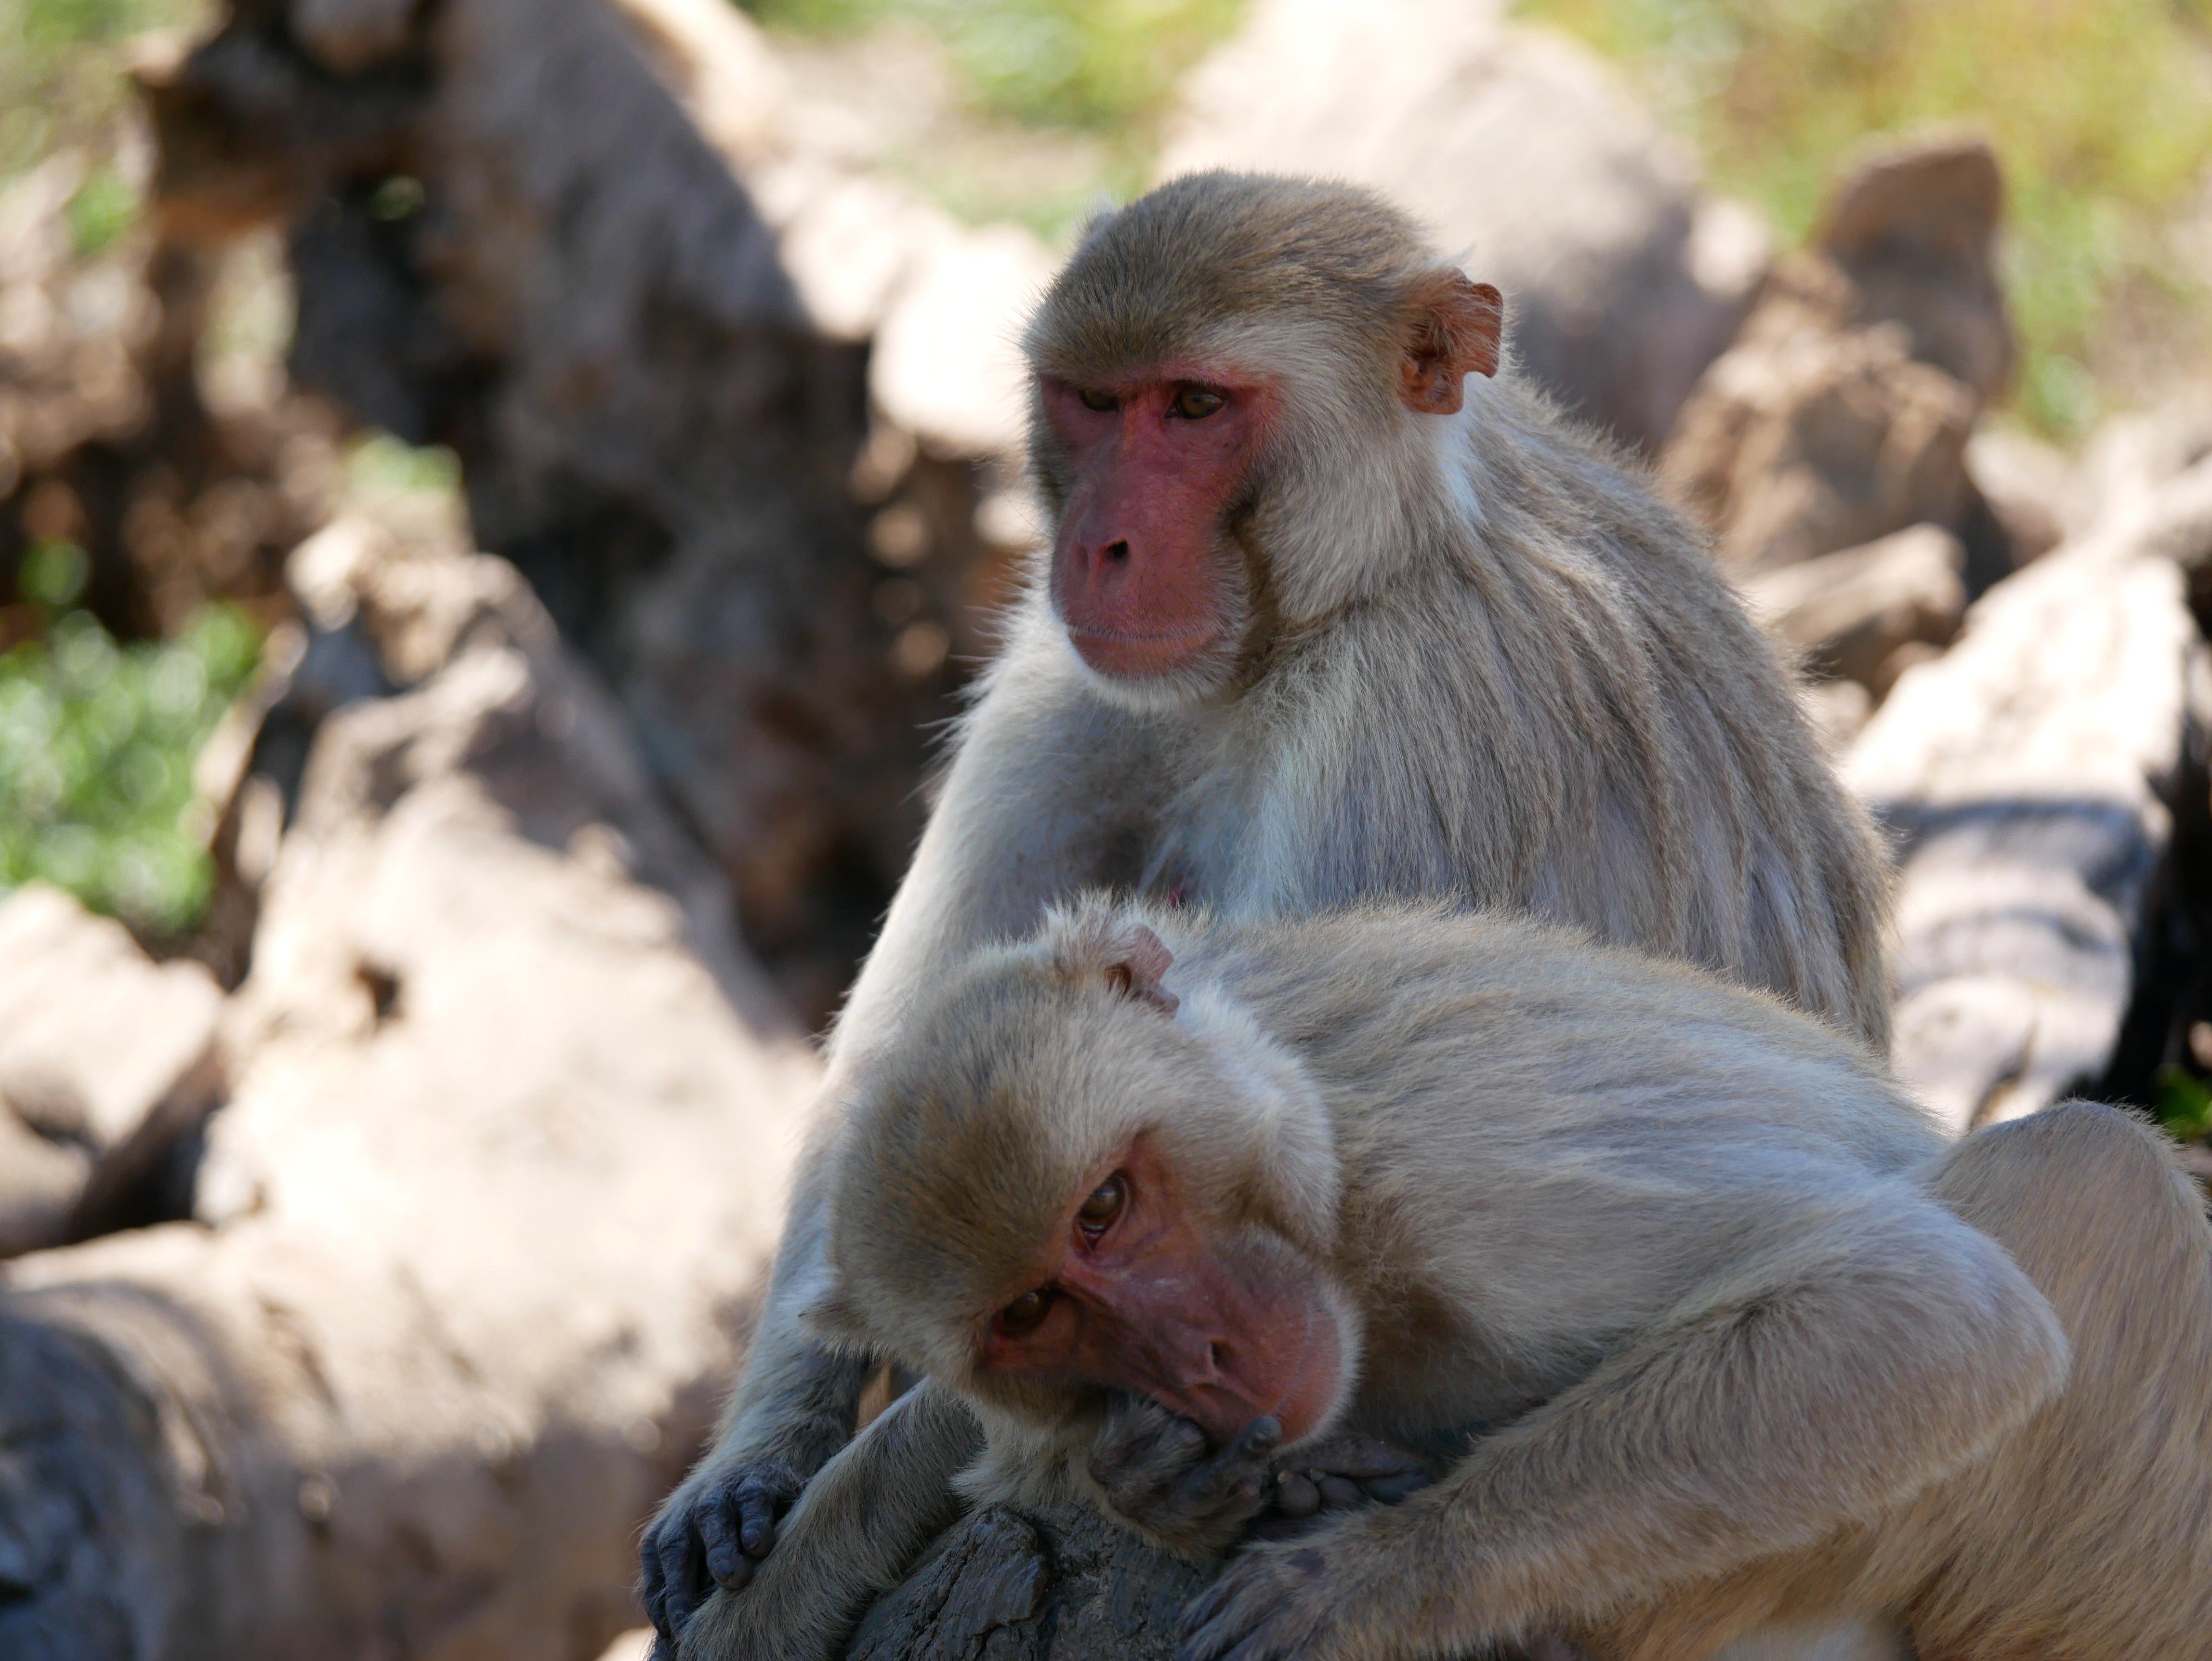 Monkey Xnxxvideos - Male Monkeys Have More Sex with Other Males Than with Females in This  Well-Studied Group | Scientific American